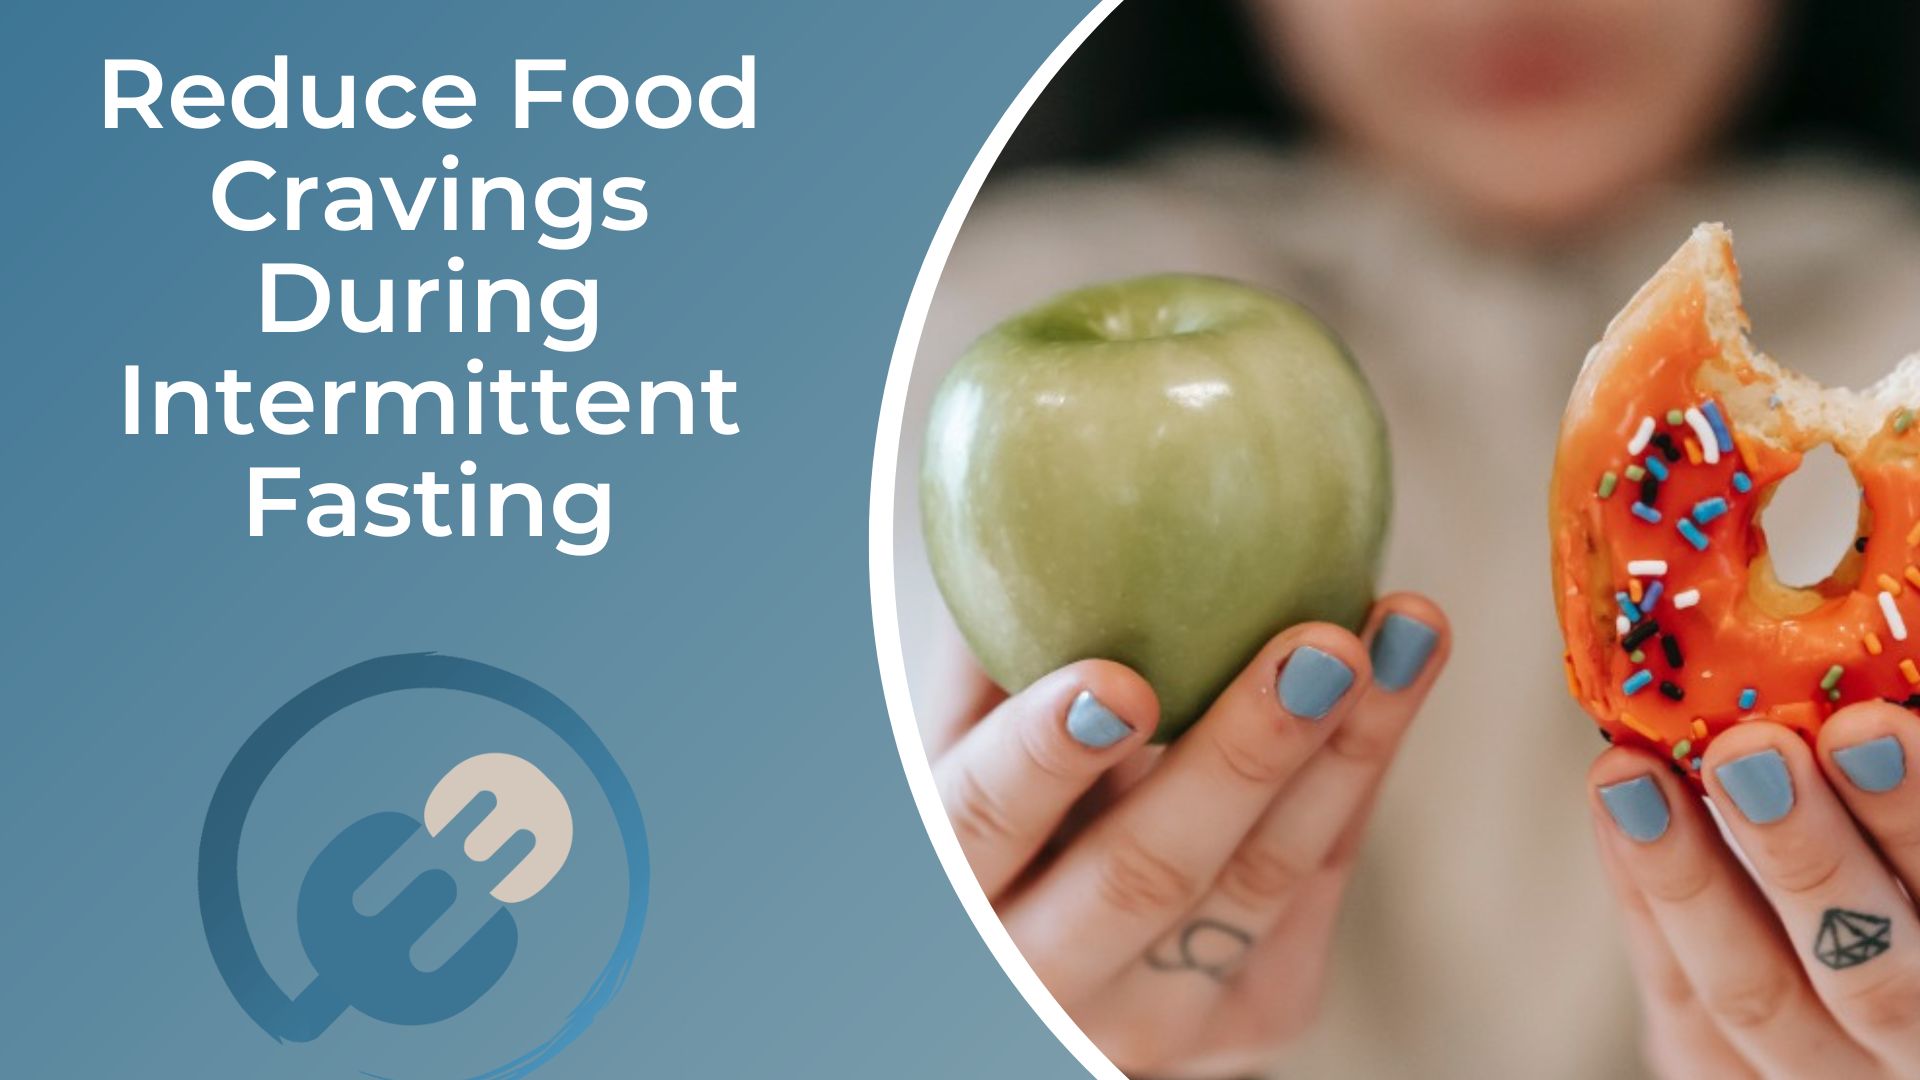 Reduce Food Cravings During Intermittent Fasting